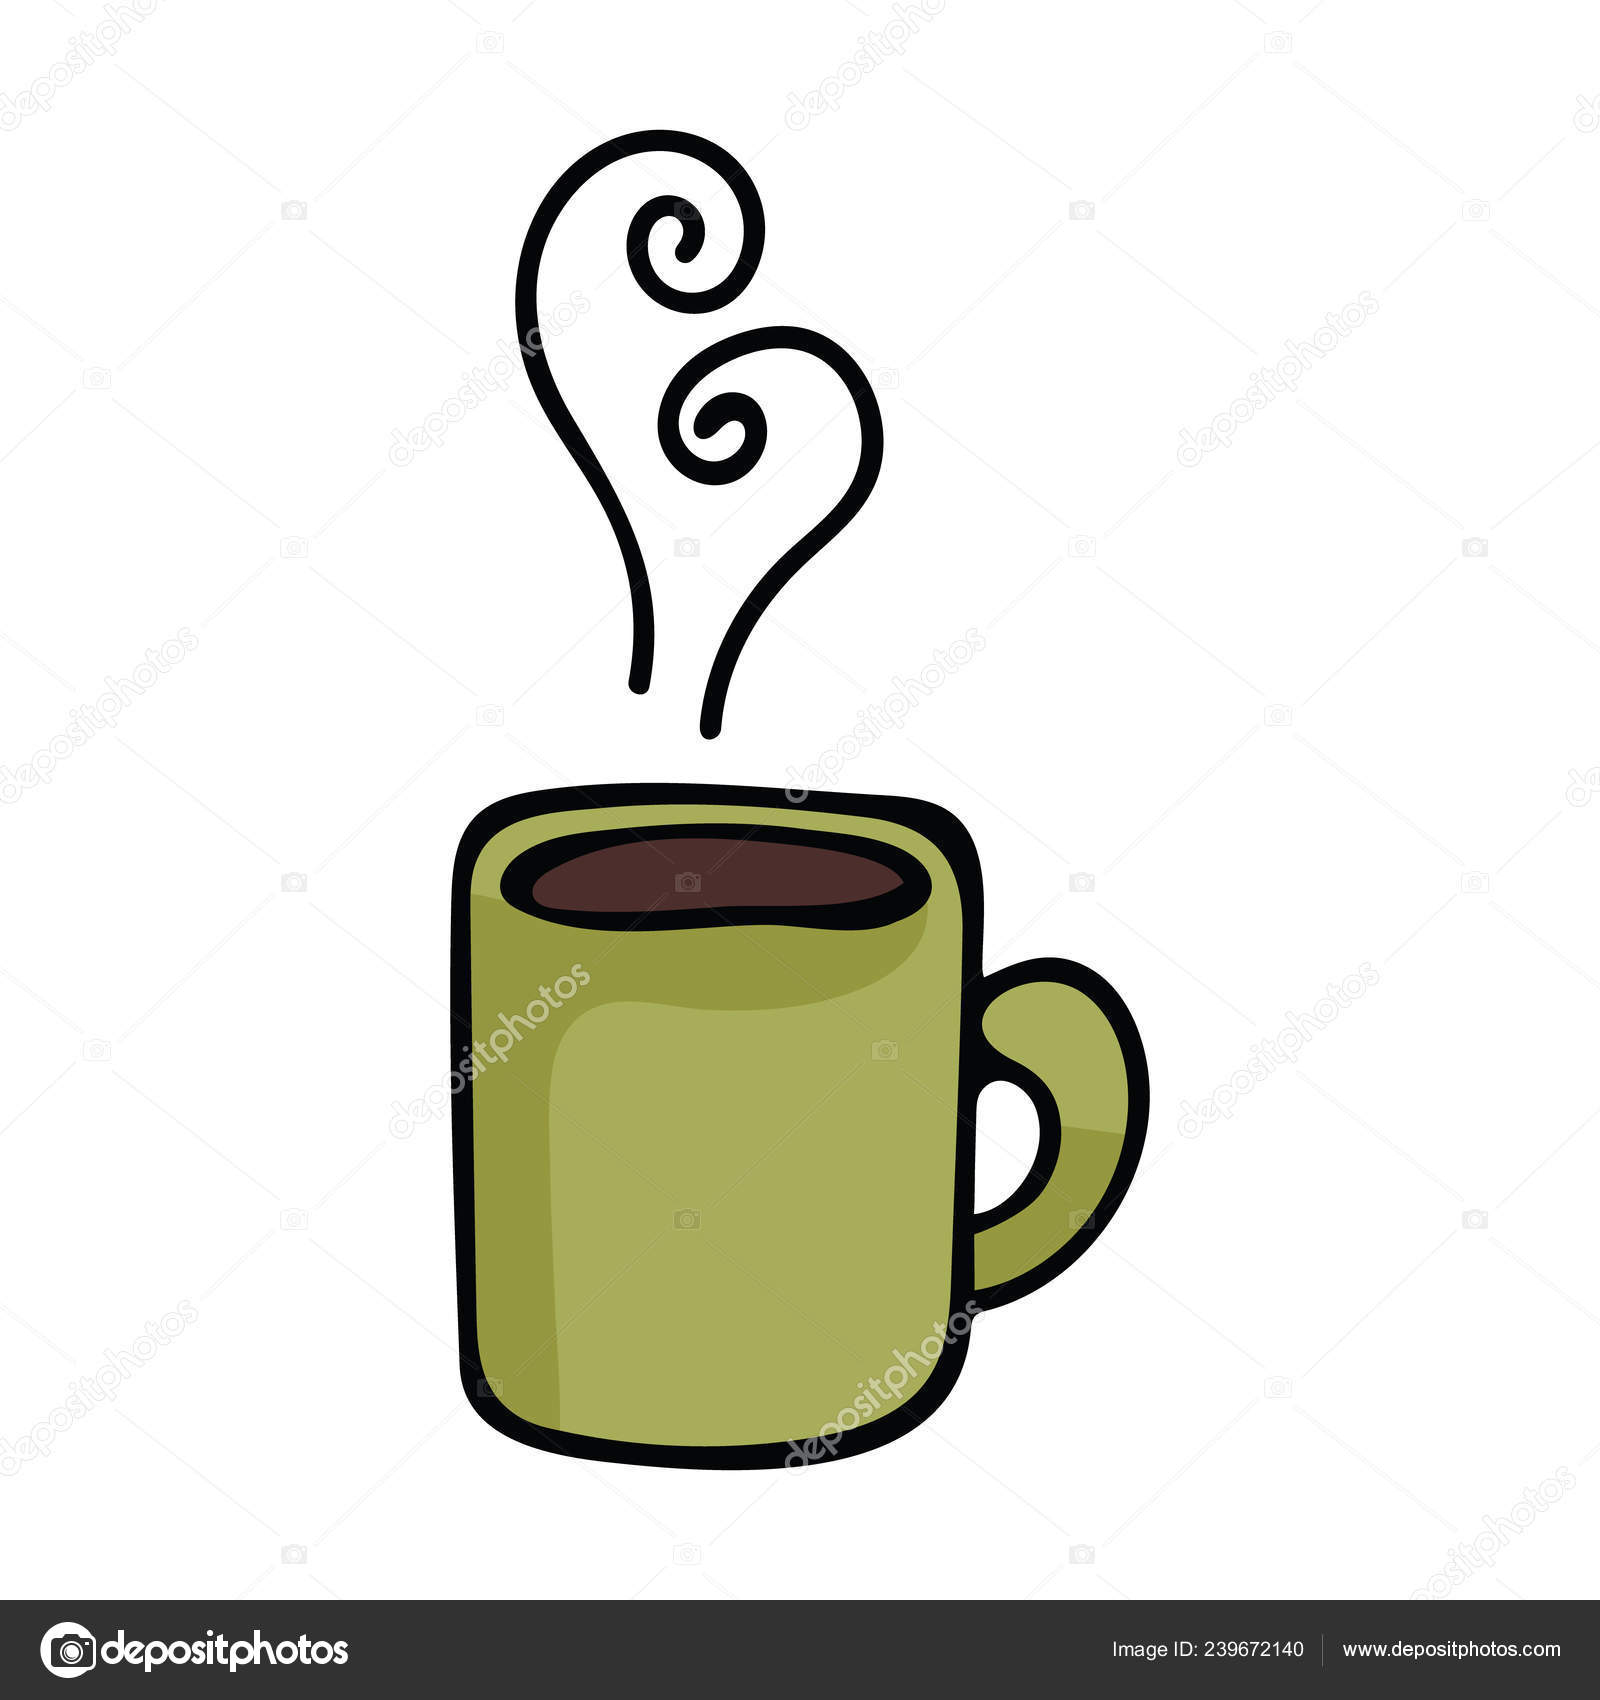 Clipart Coffee Mug Cute Coffee Mug Cartoon Vector Illustration Motif Set Hand Drawn Stock Vector C Limolidastudio Gmail Com 239672140 Check out our cartoon mug selection for the very best in unique or custom, handmade pieces from our mugs shops. clipart coffee mug cute coffee mug cartoon vector illustration motif set hand drawn stock vector c limolidastudio gmail com 239672140